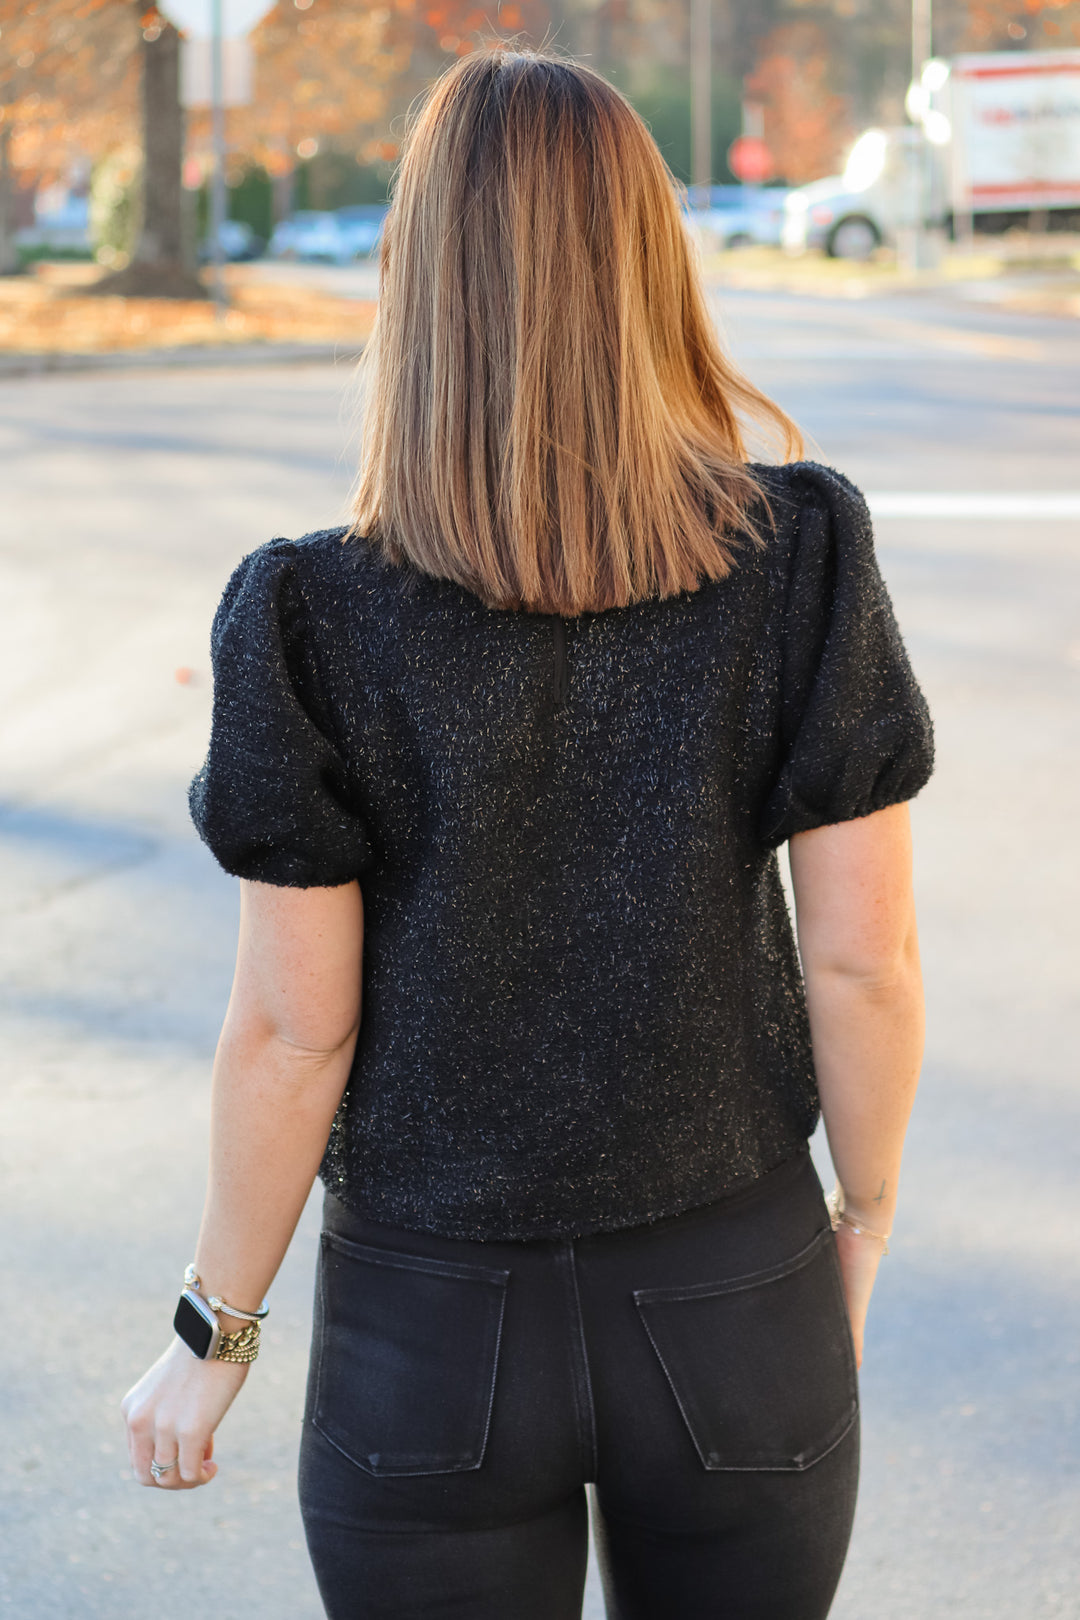 A brunette woman standing outside wearing a soft and shiny black top with short bubble sleeves and black jeans. She is rear facing.